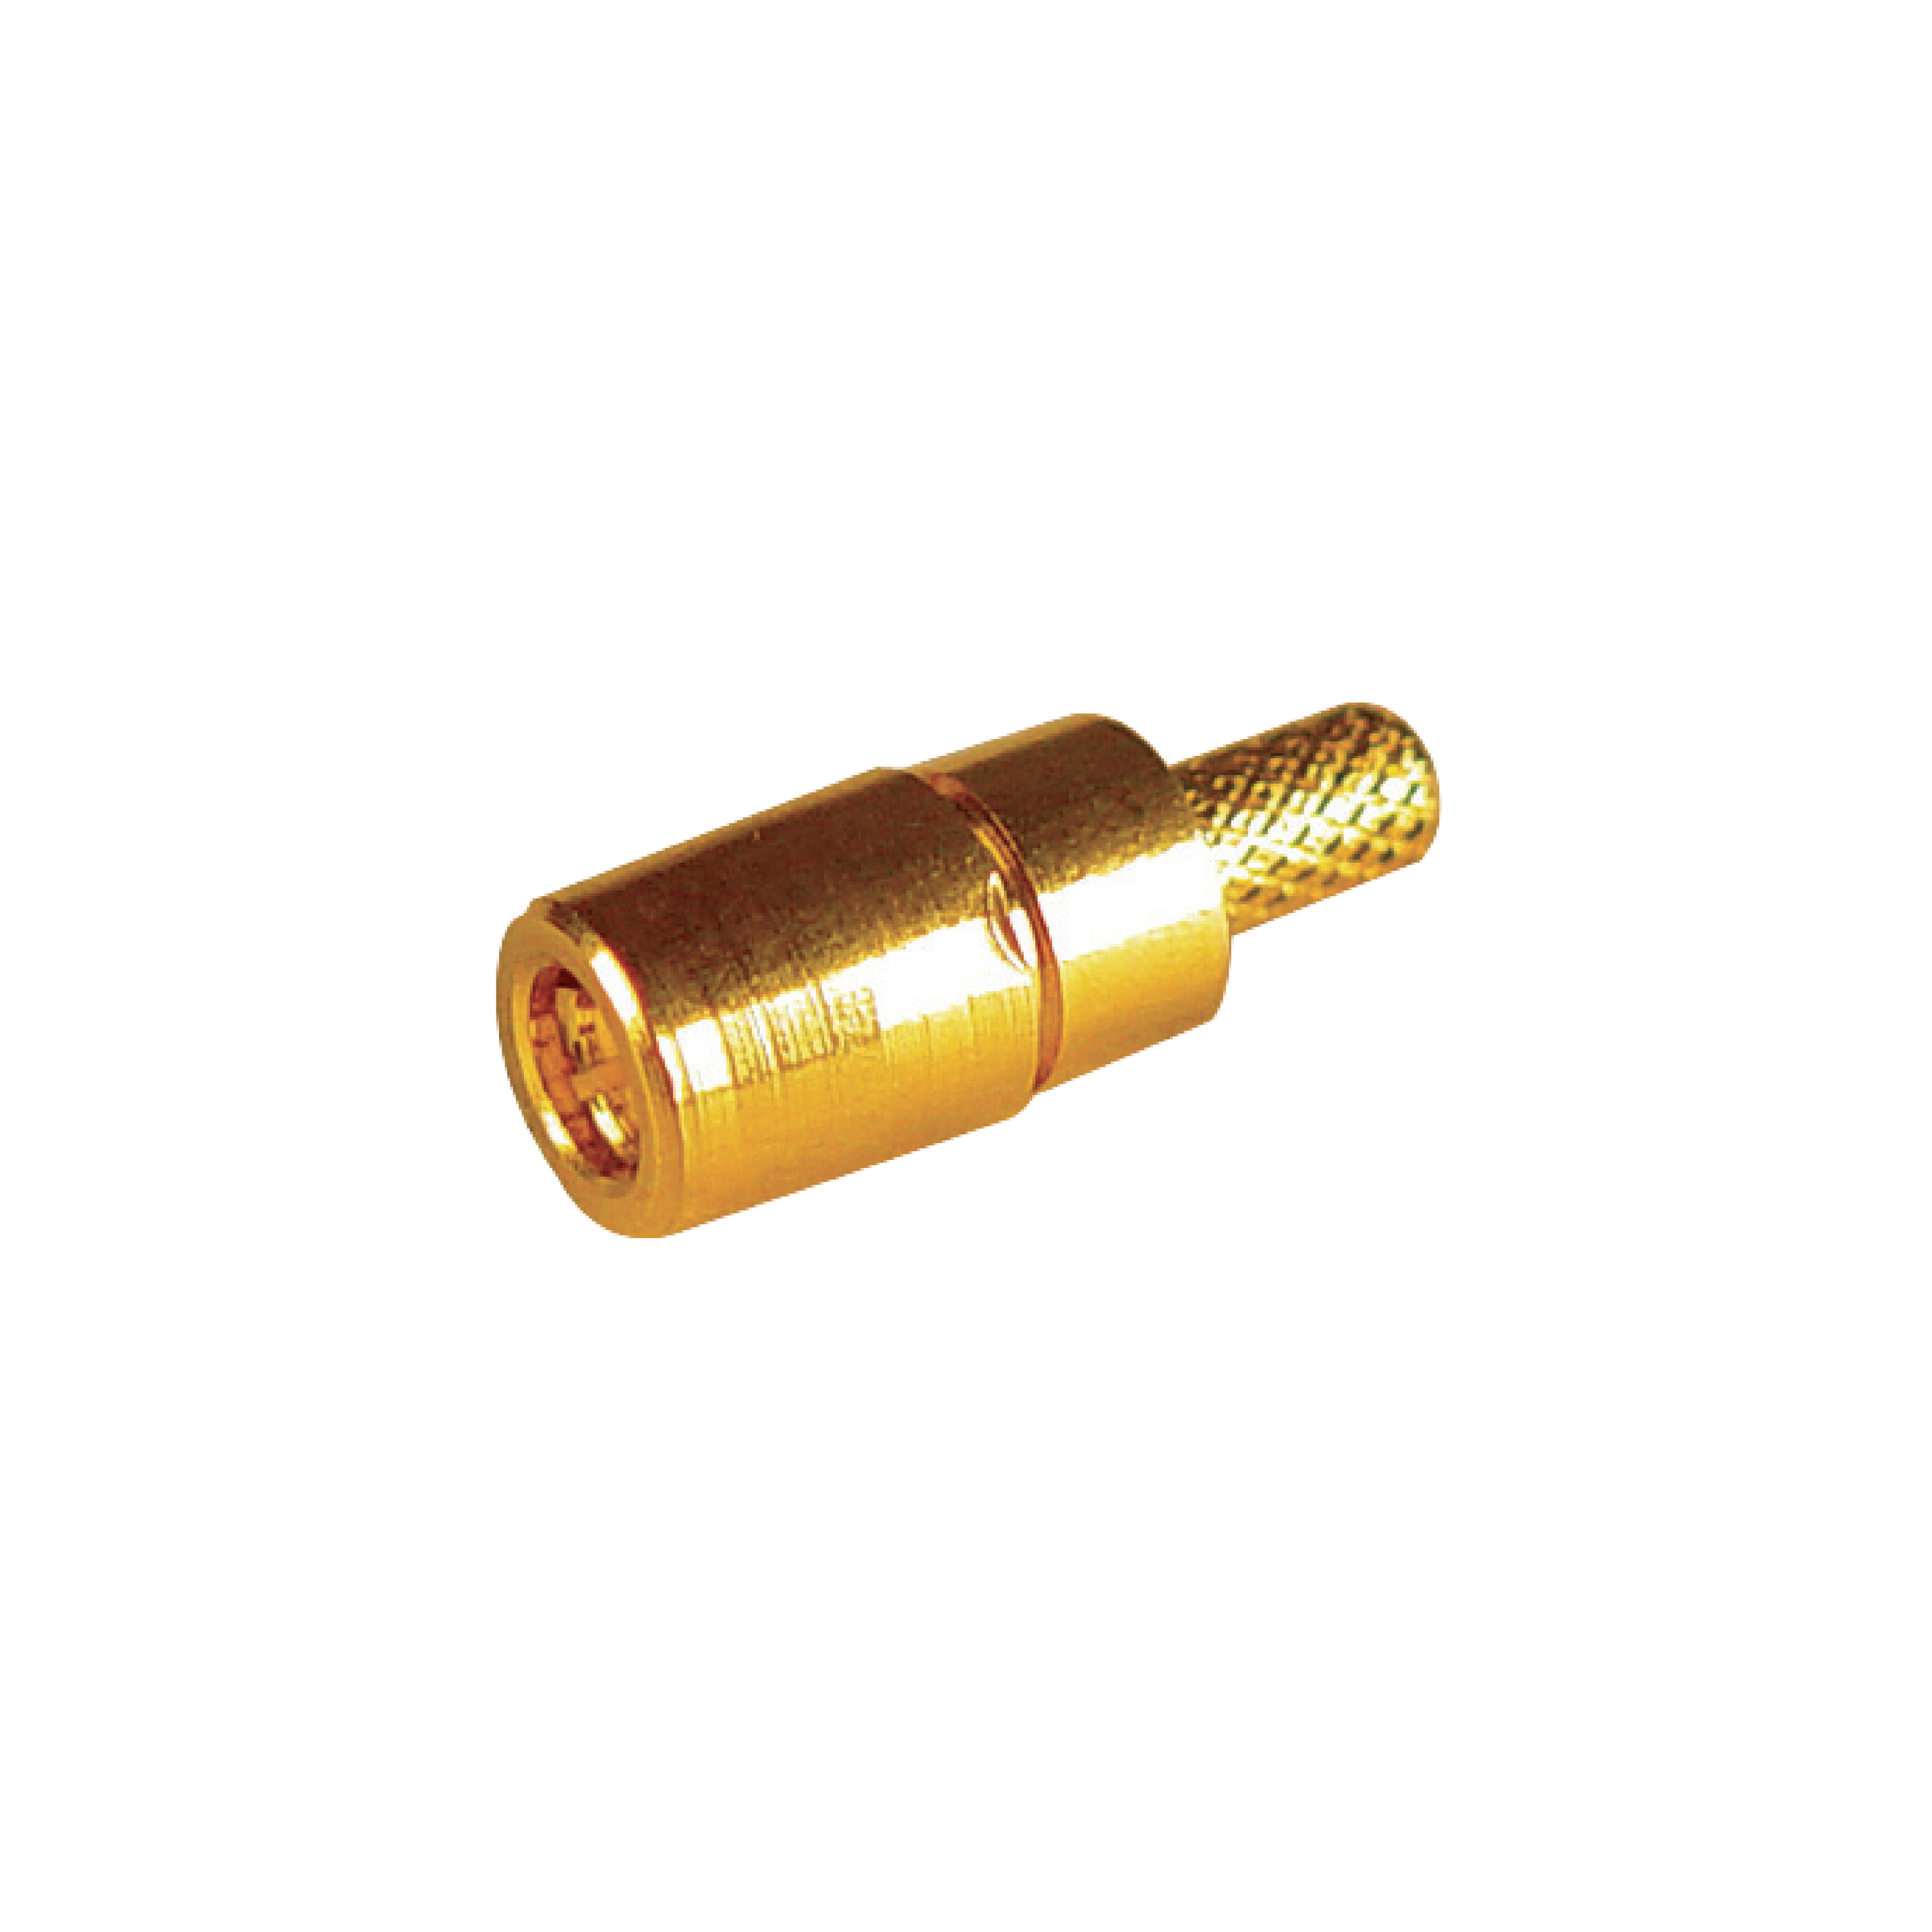 Coaxial Connector & Adapter_BT43 Coaxial Connector_SMB Straight Male Crimp (Type A).jpg